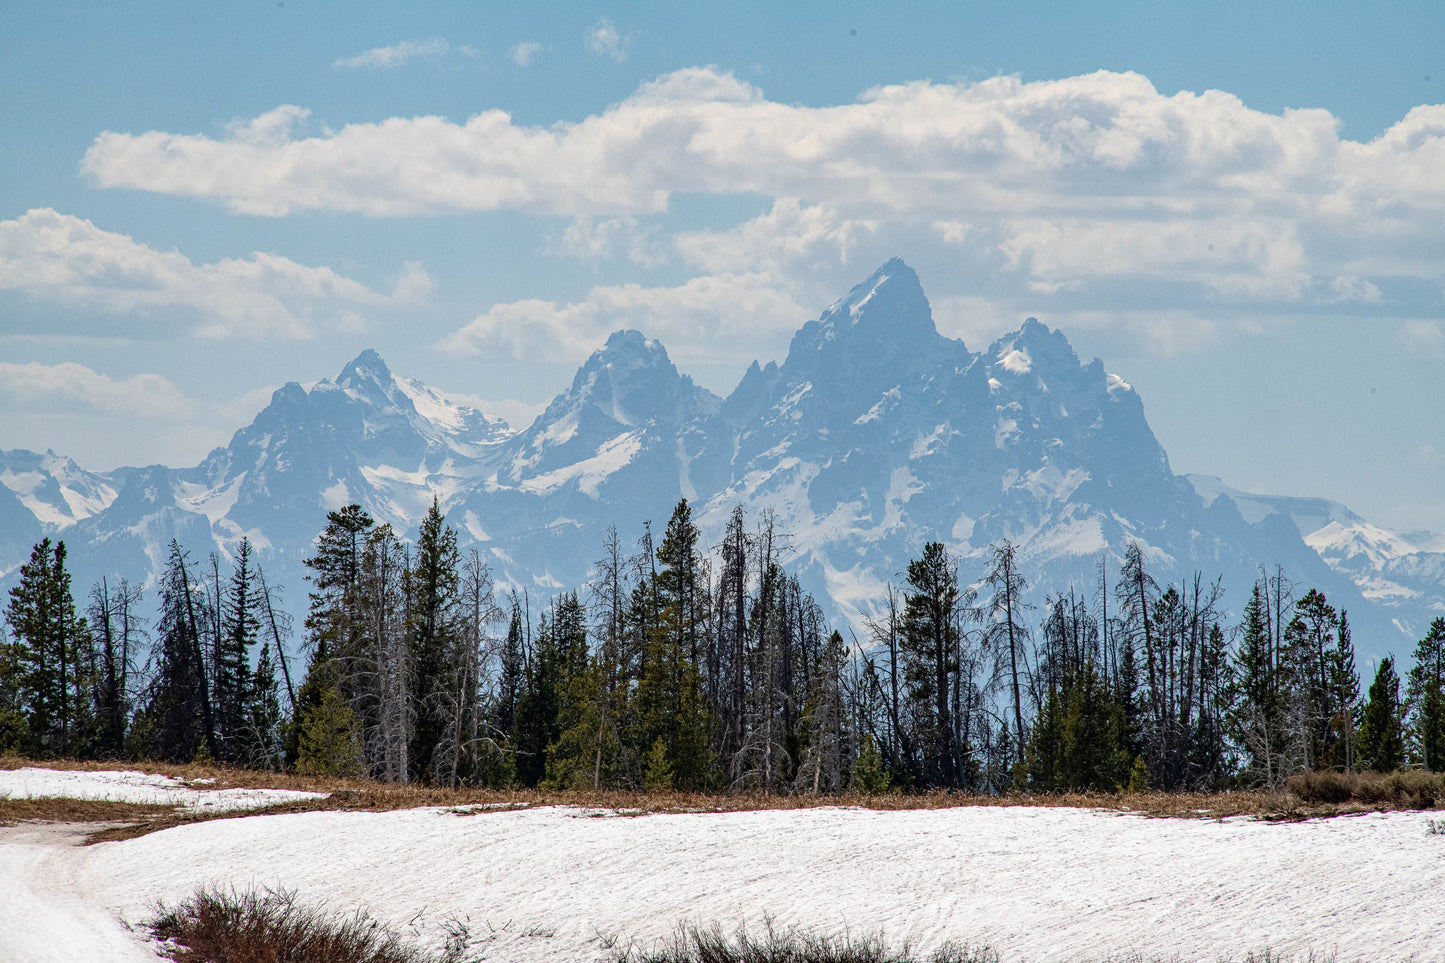 " View Of The Tetons From Togwotee Pass " Matted Photograph